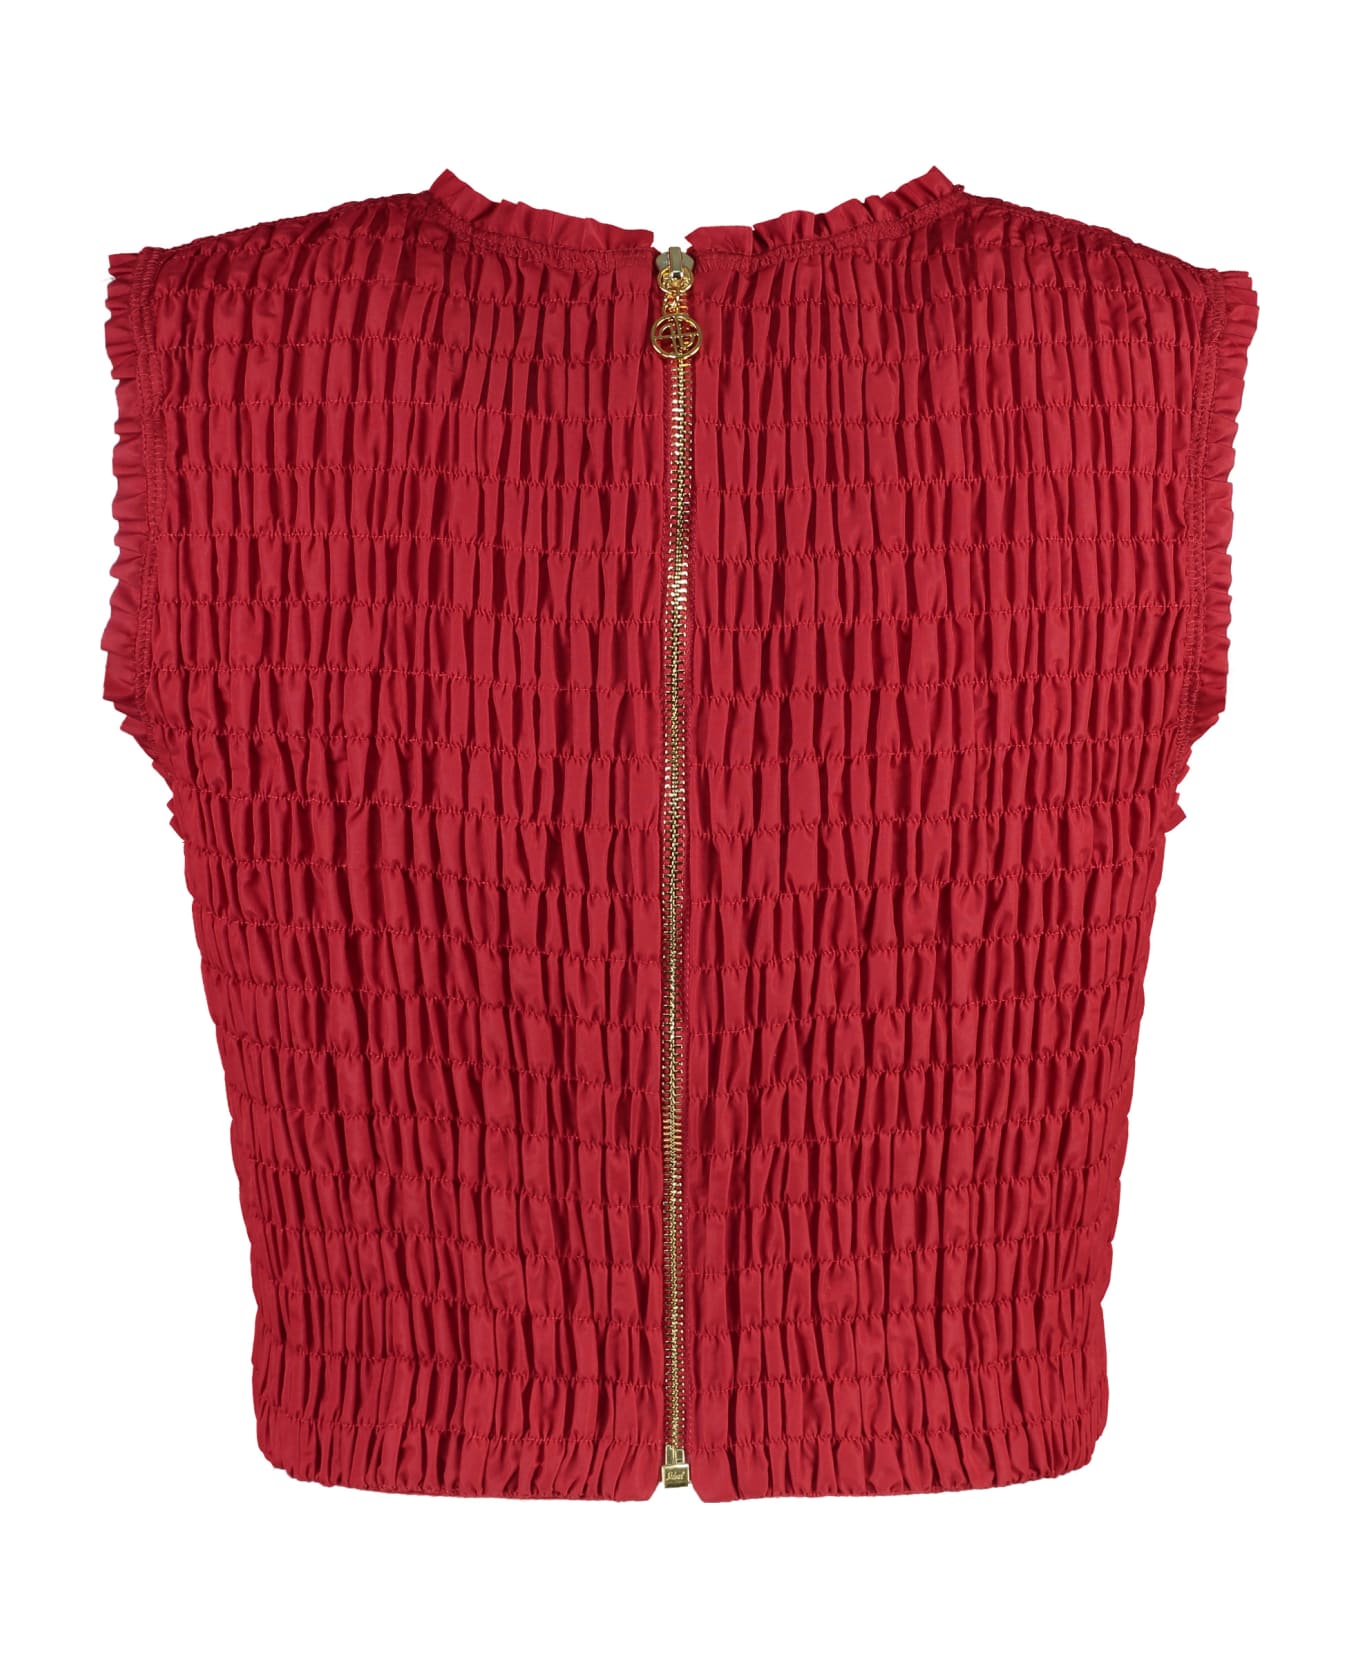 Patou Technical Fabric Crop Top - red